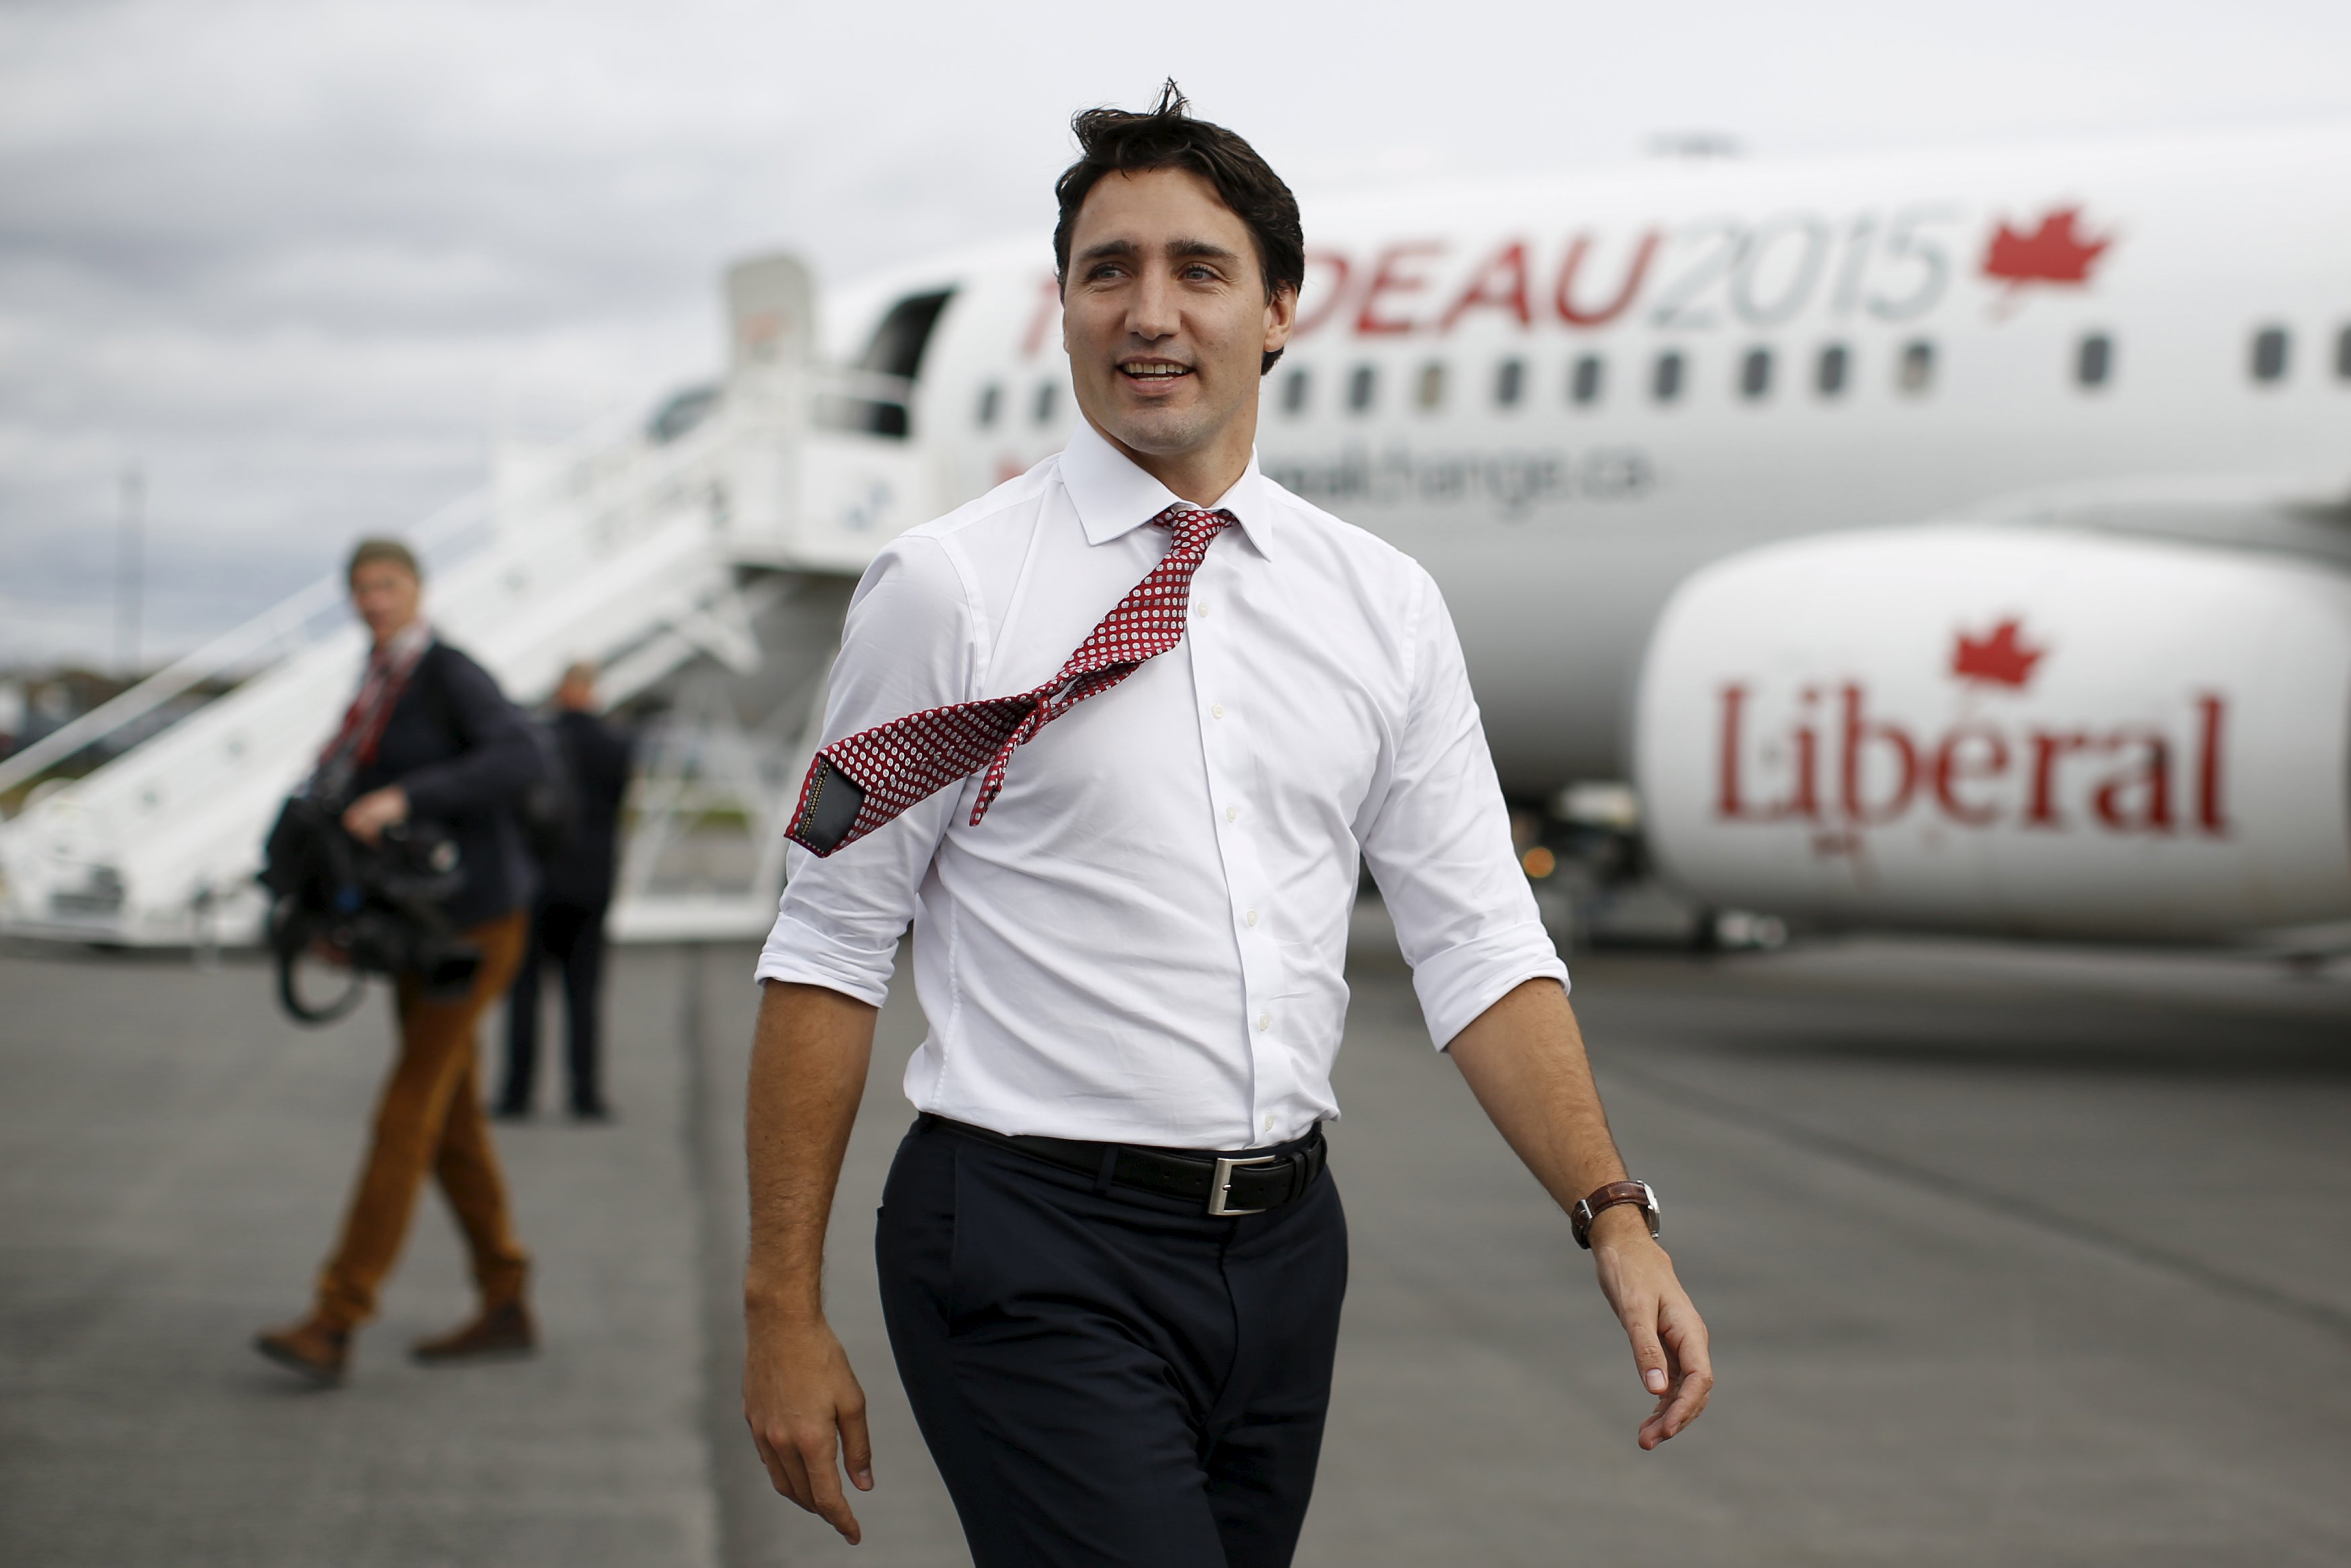 Liberal leader Trudeau walks on the tarmac after arriving in Saint John